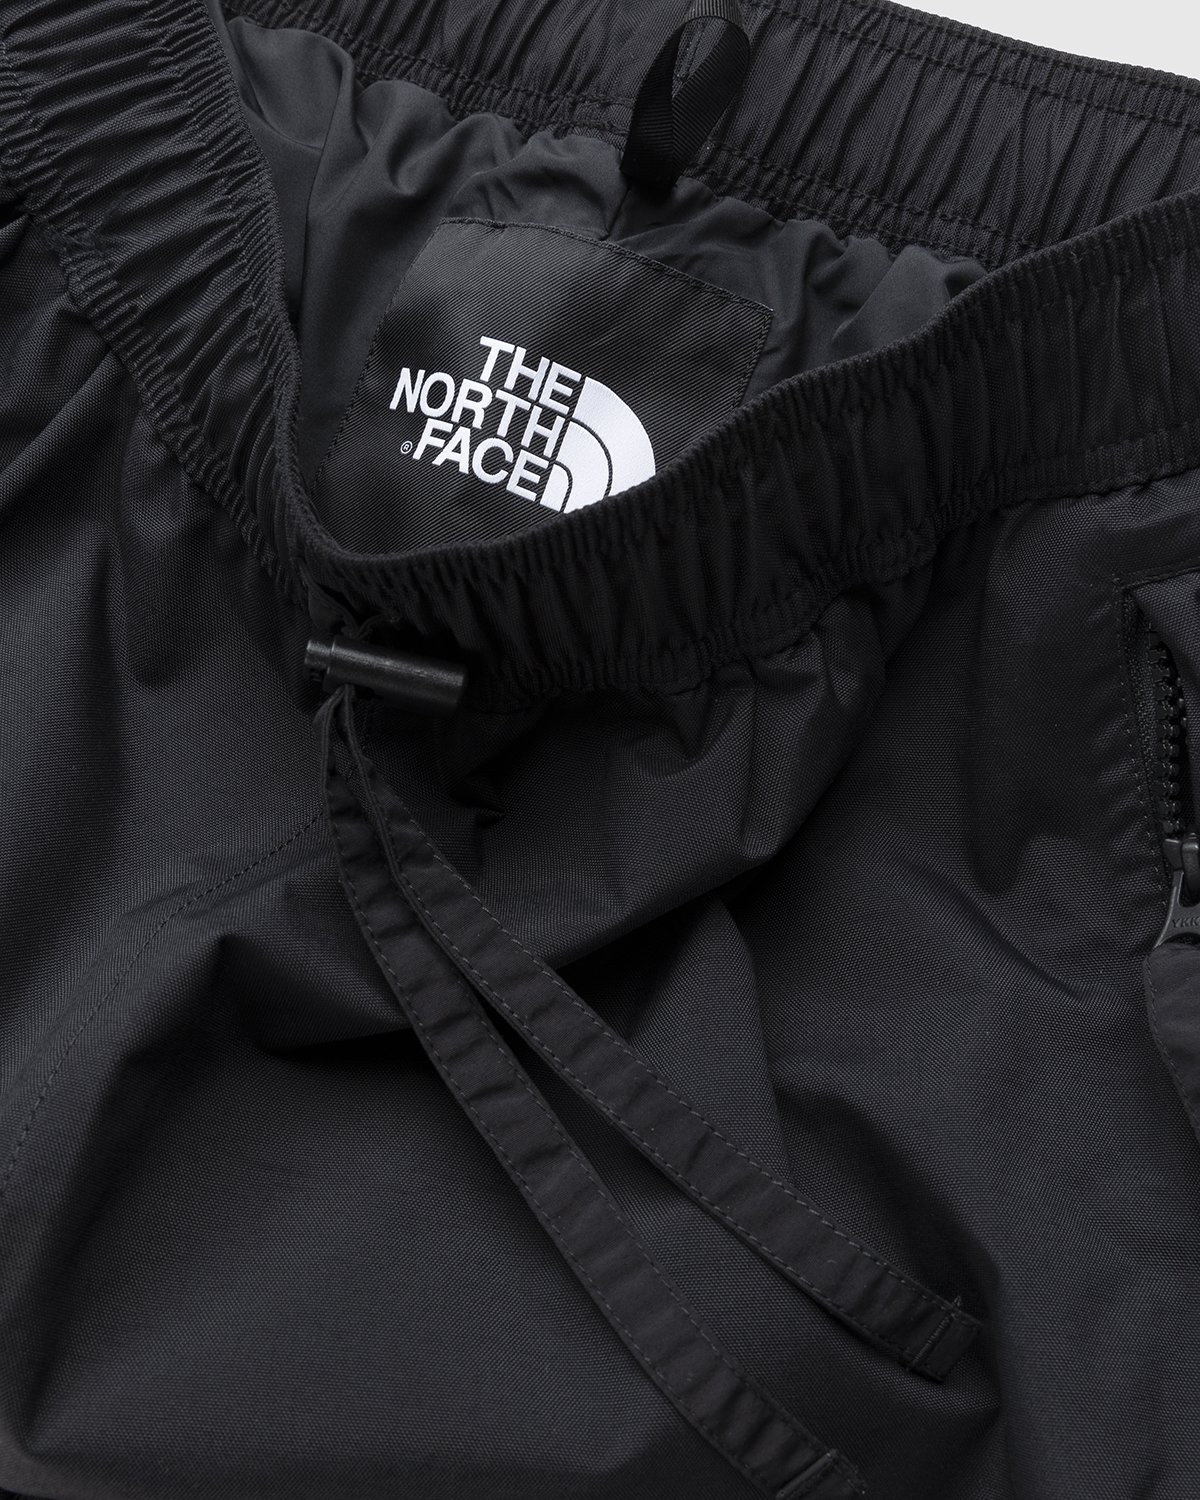 The North Face - Trans Antarctica Expedition Pant Black - Clothing - Black - Image 4